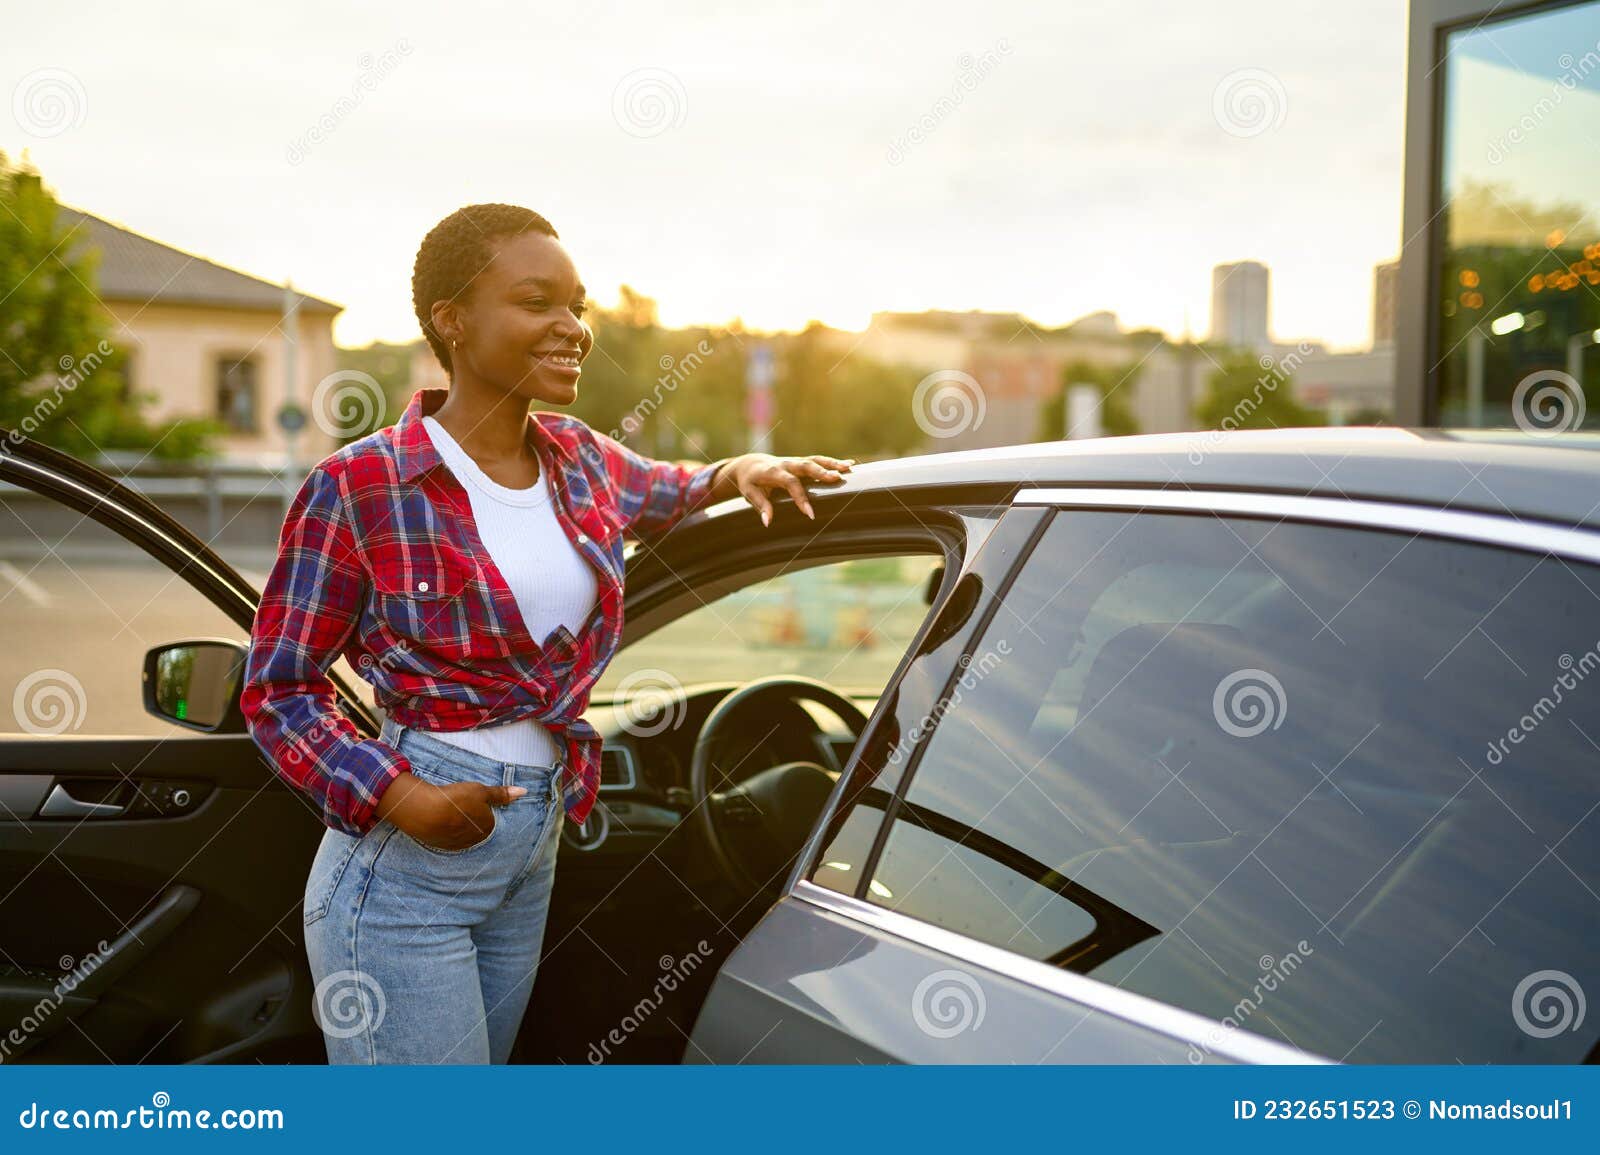 Woman Posing in Front of a Car · Free Stock Photo